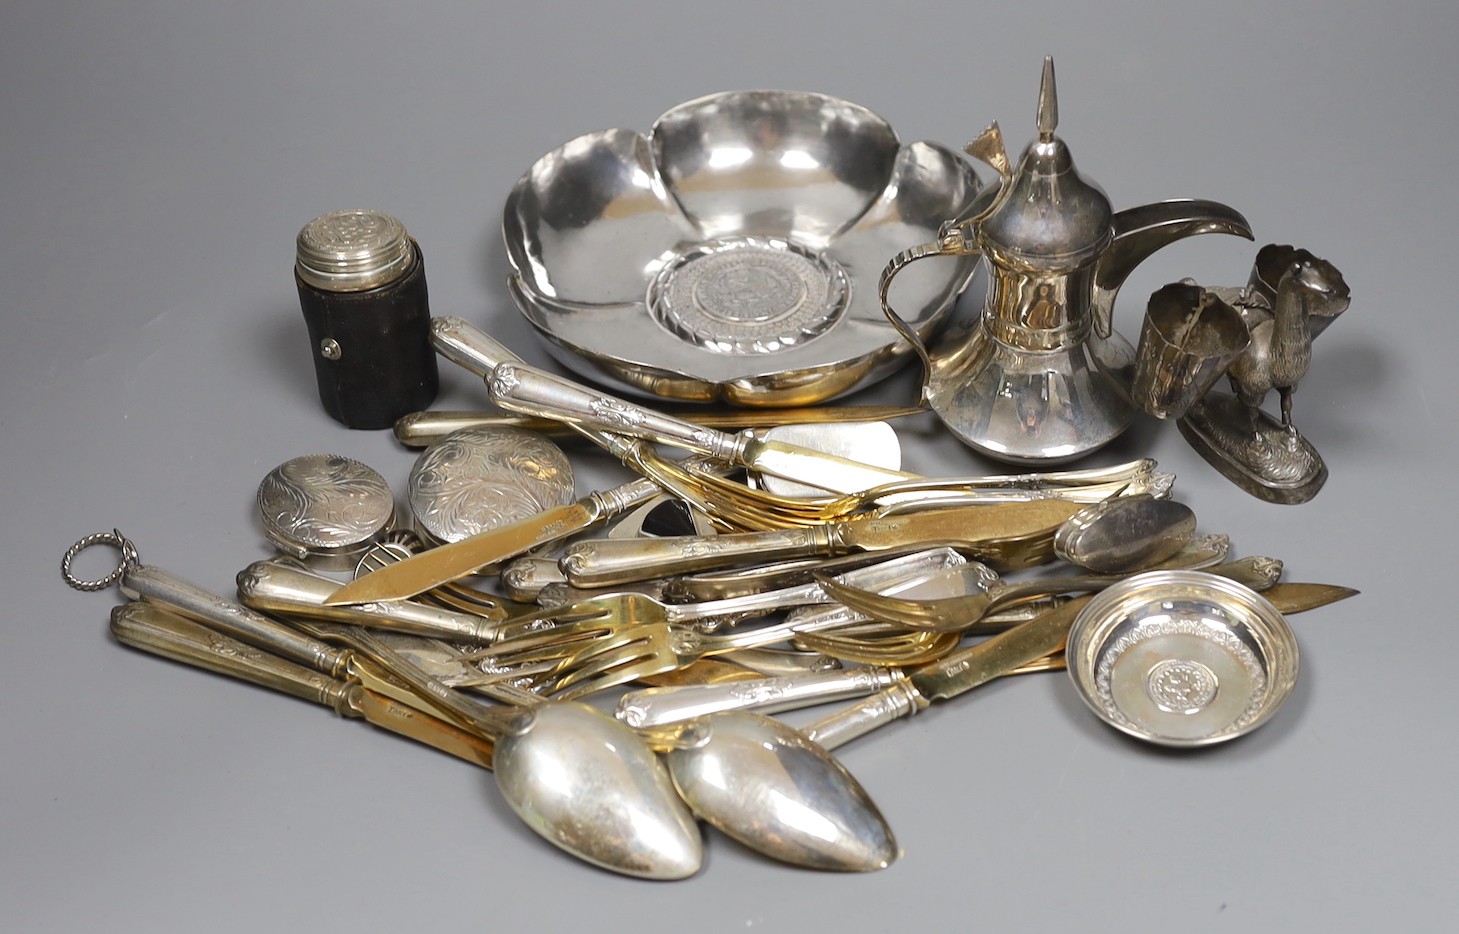 A Peruvian sterling dish with inset coin, an Egyptian white metal pill box, other 925 and white metal items including flatware, ring and sterling travelling beakers.